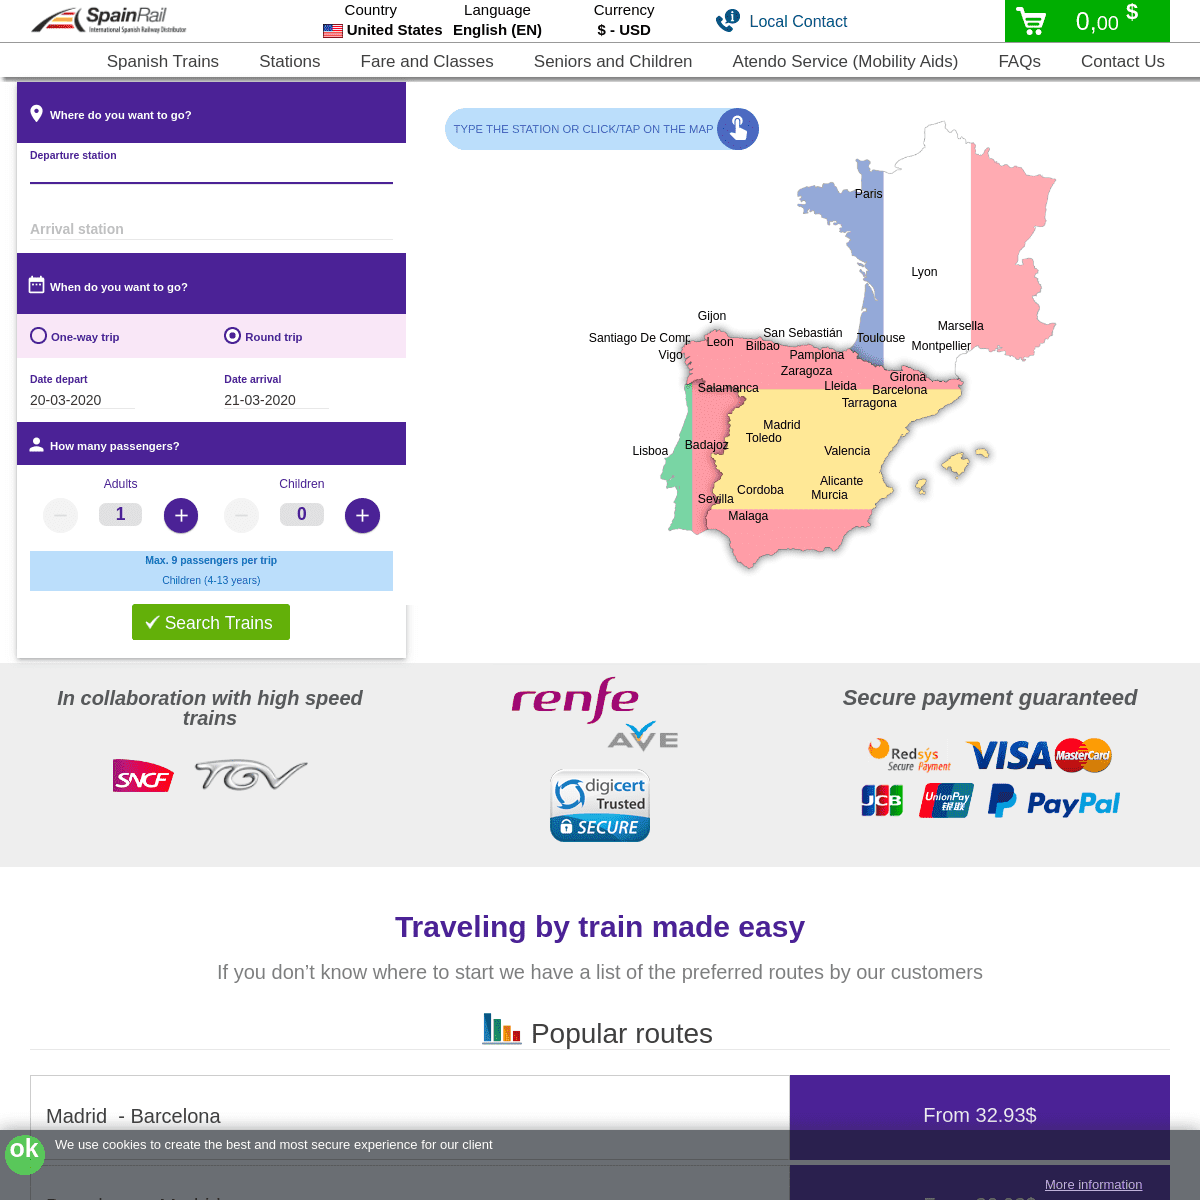 A complete backup of spainrail.com